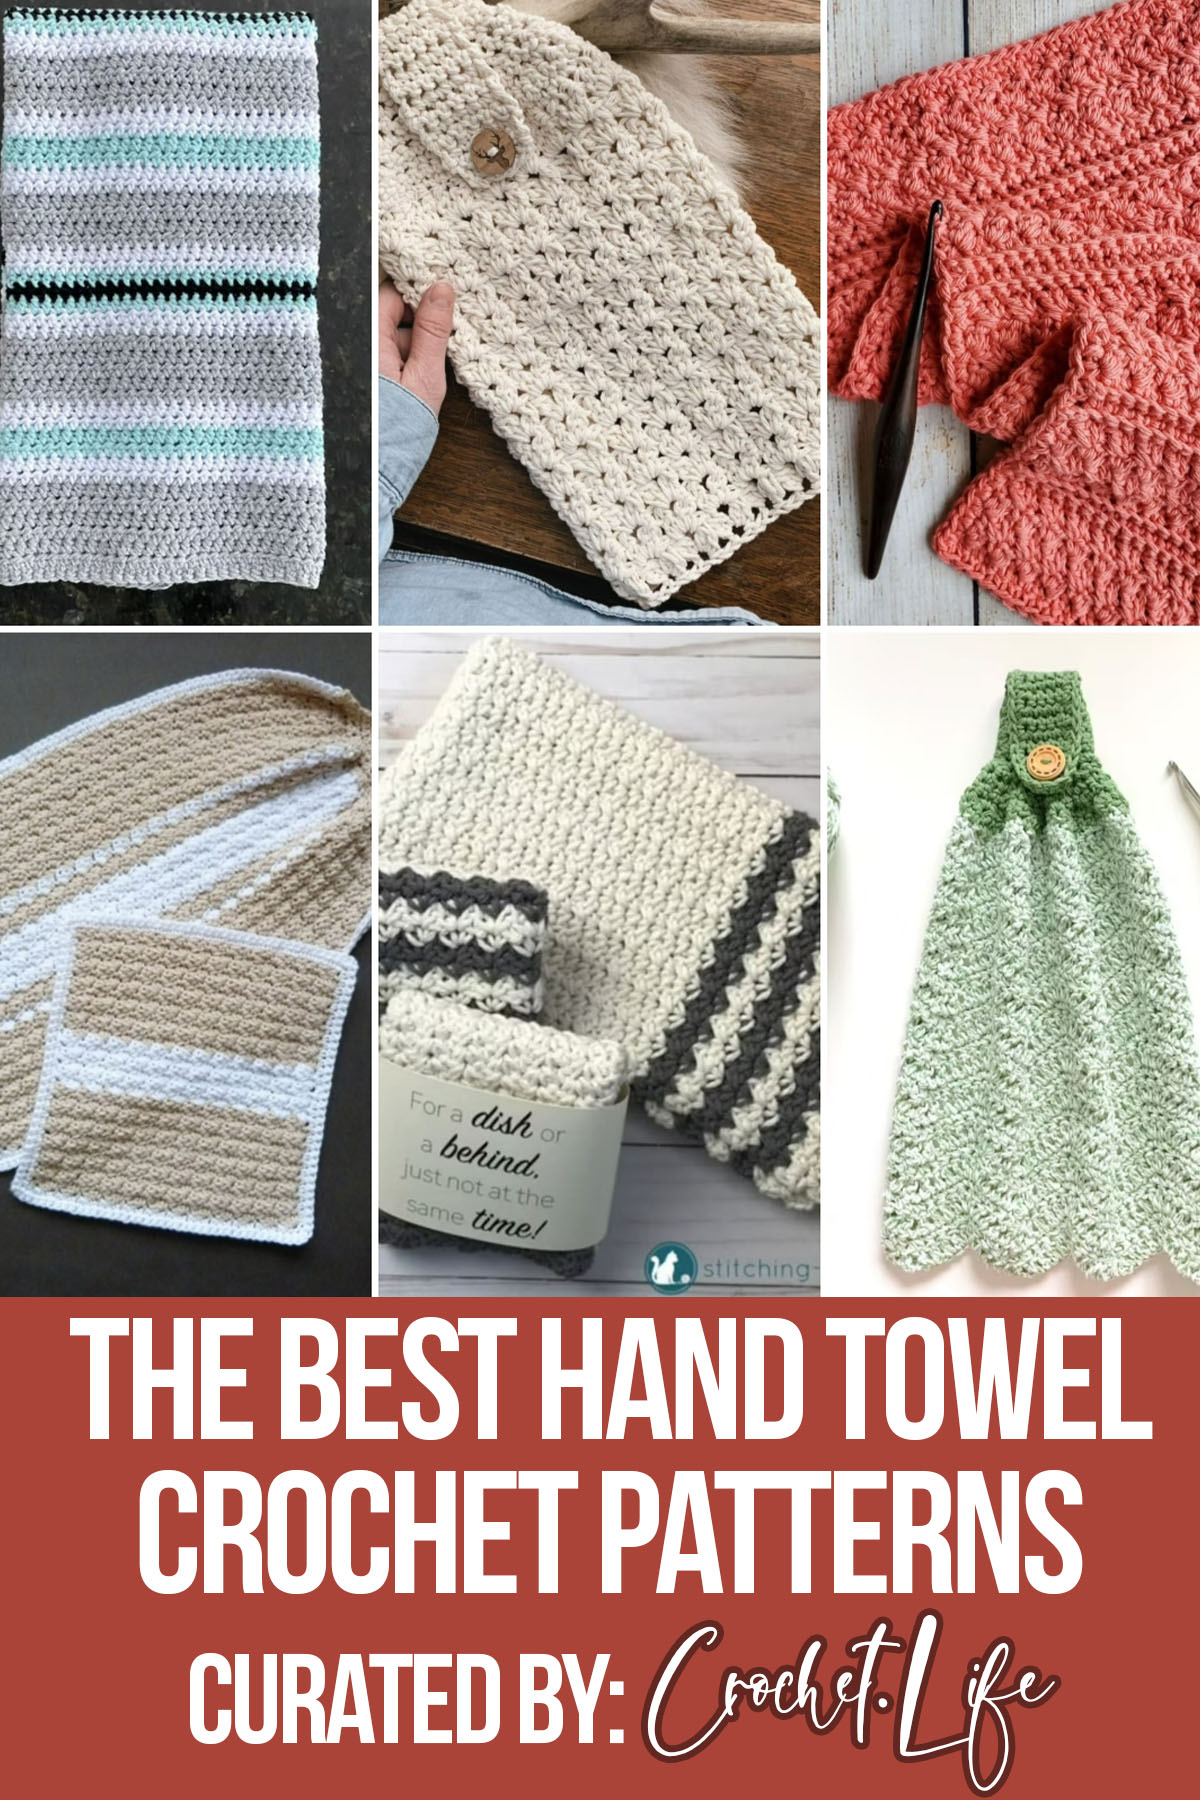 photo collage of kitchen towel crochet patterns with text which reads the best hand towel crochet patterns curated by crochet.life